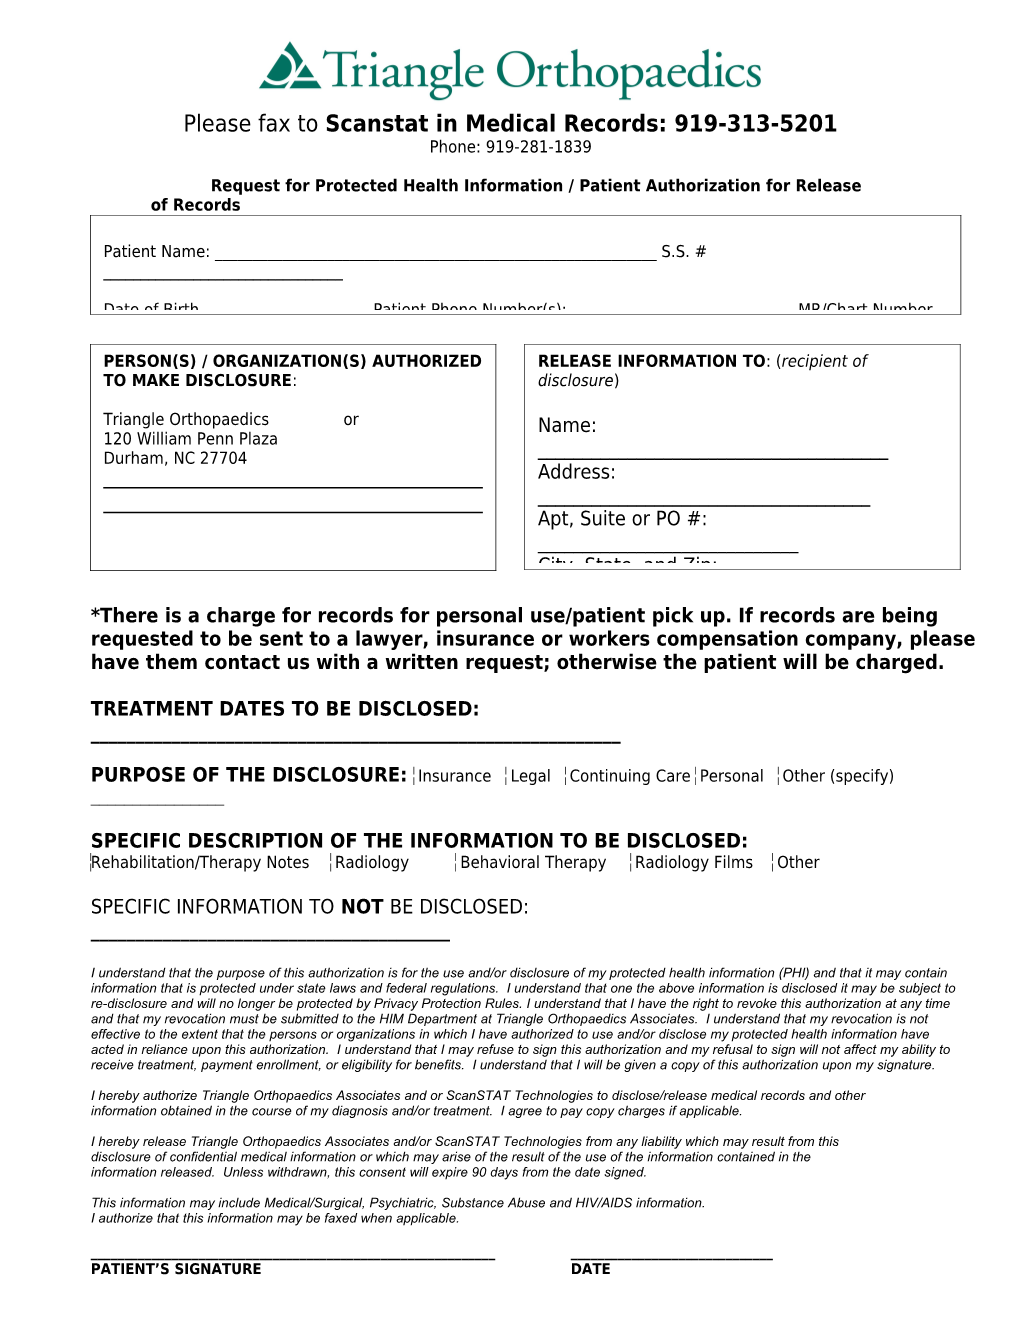 Request for Protected Health Information / Patient Authorization for Release of Records